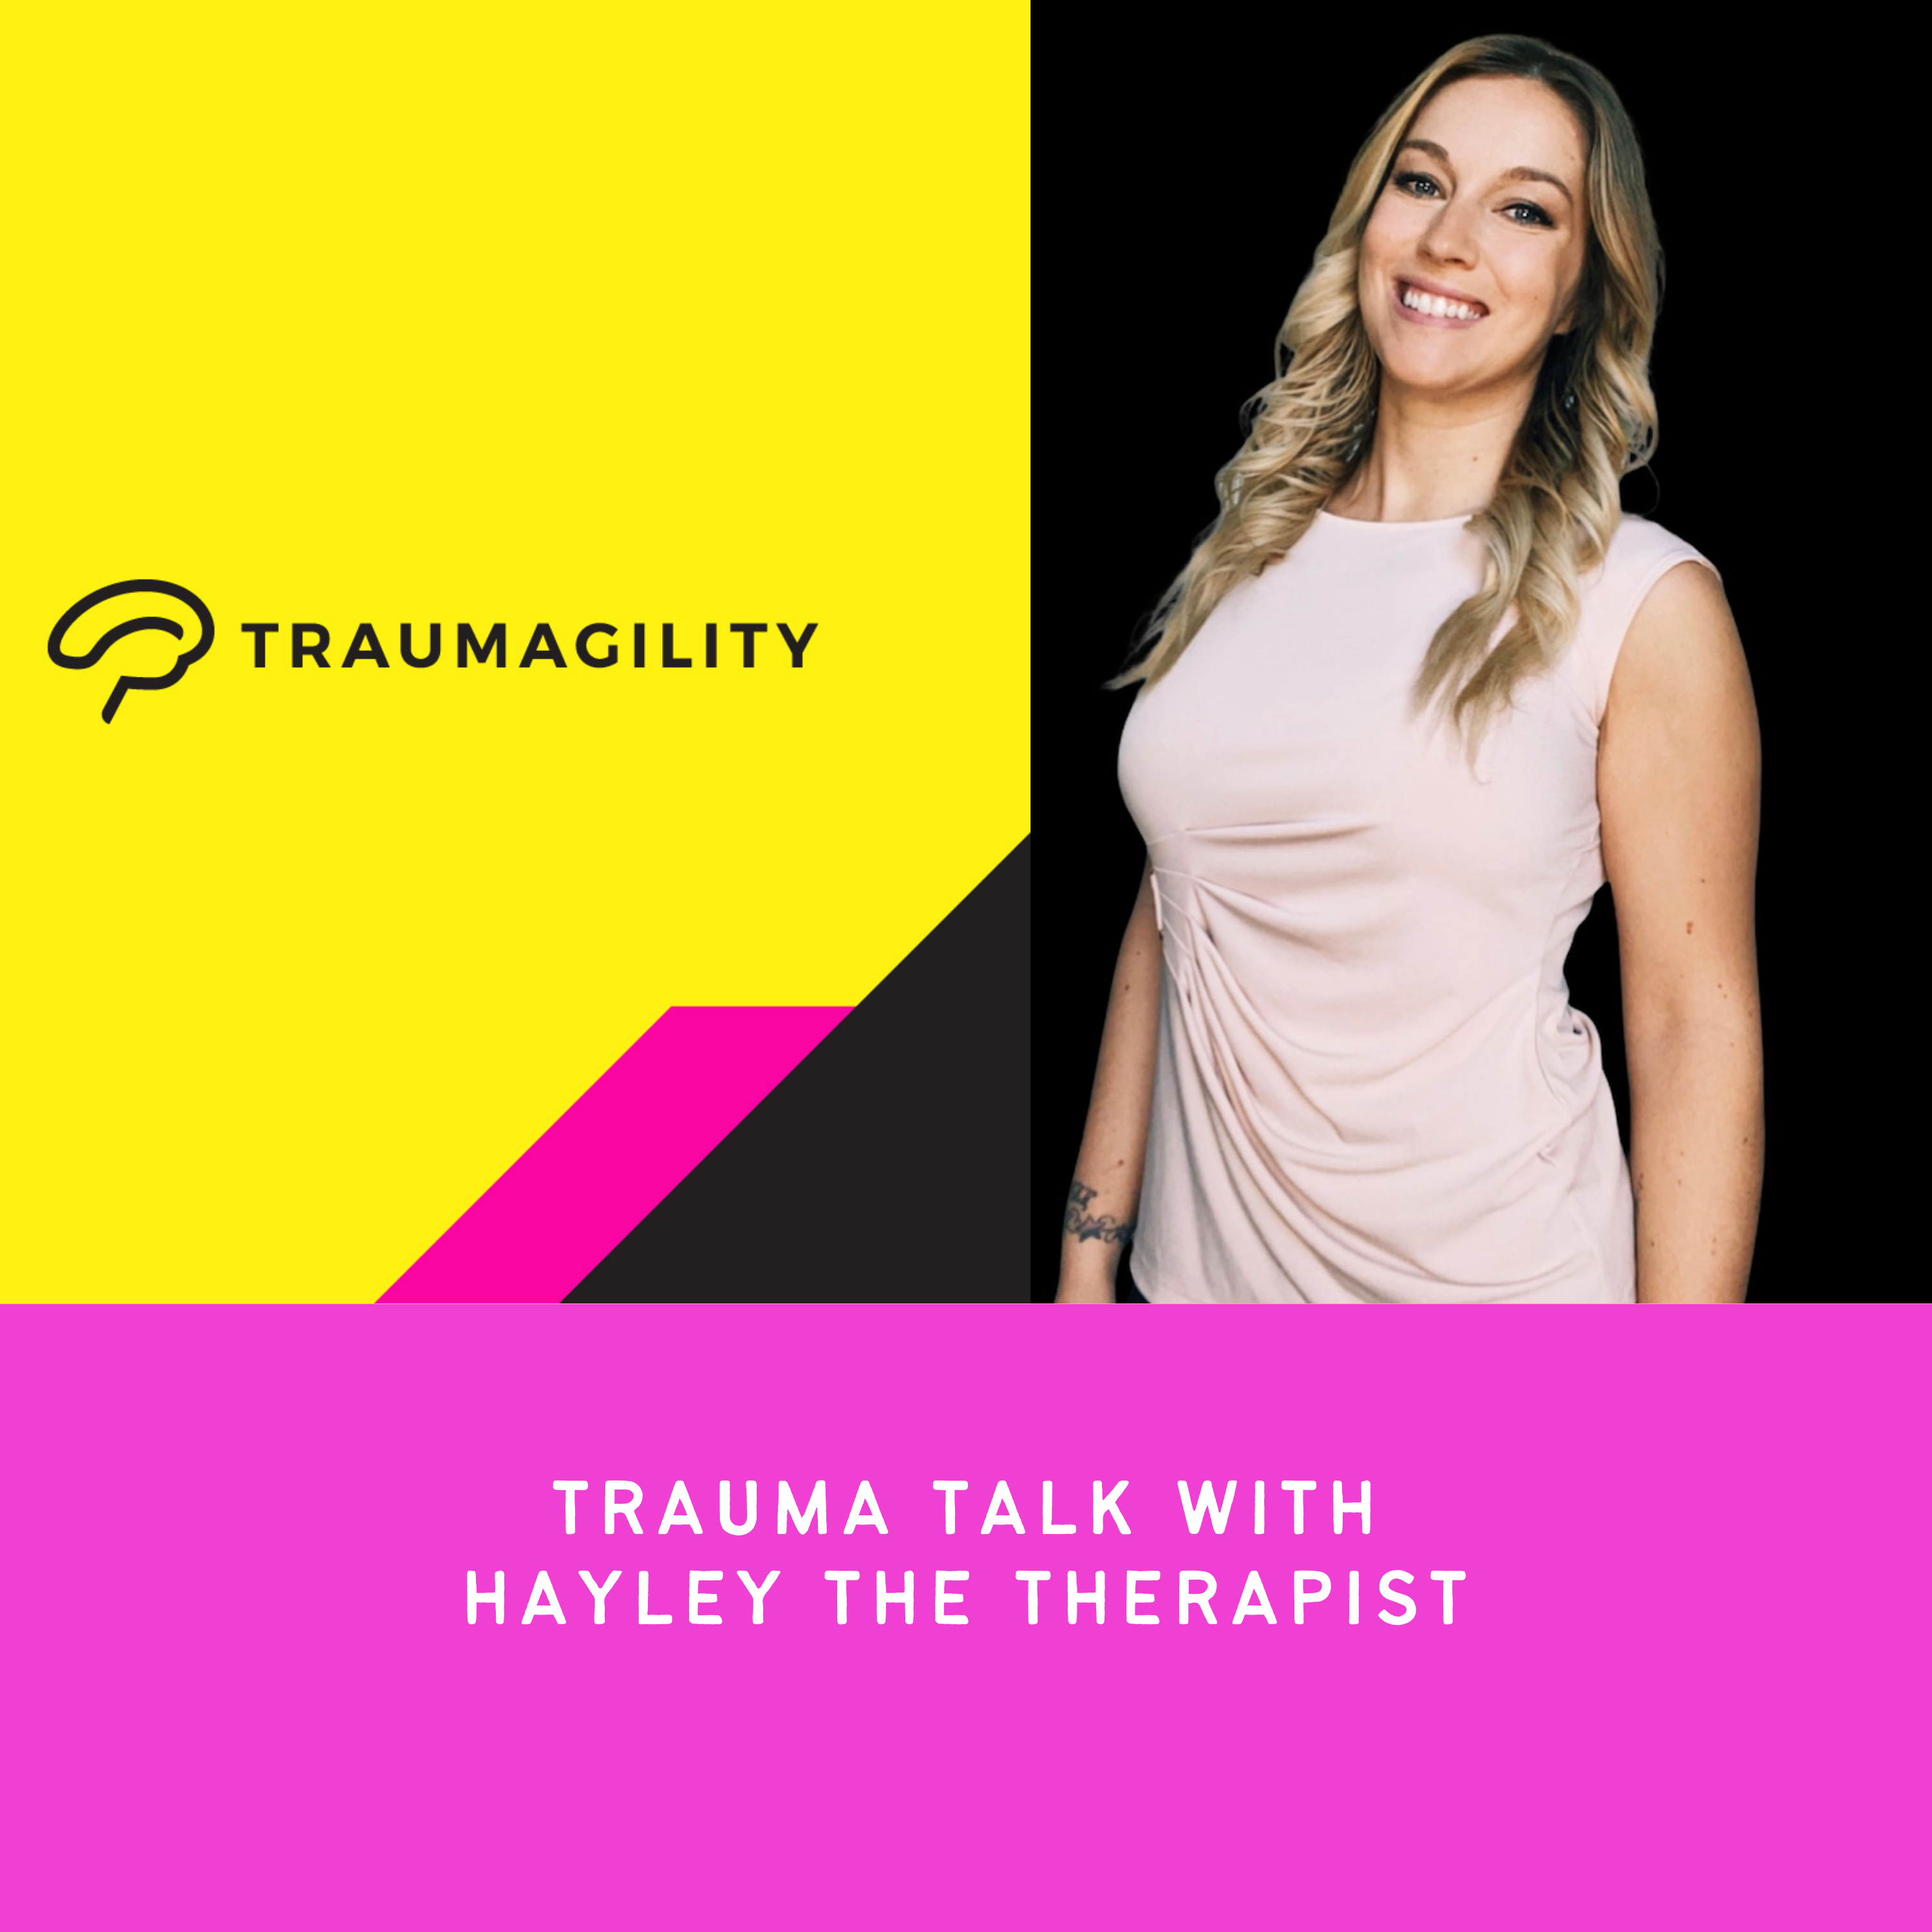 Artwork for podcast Traumagility